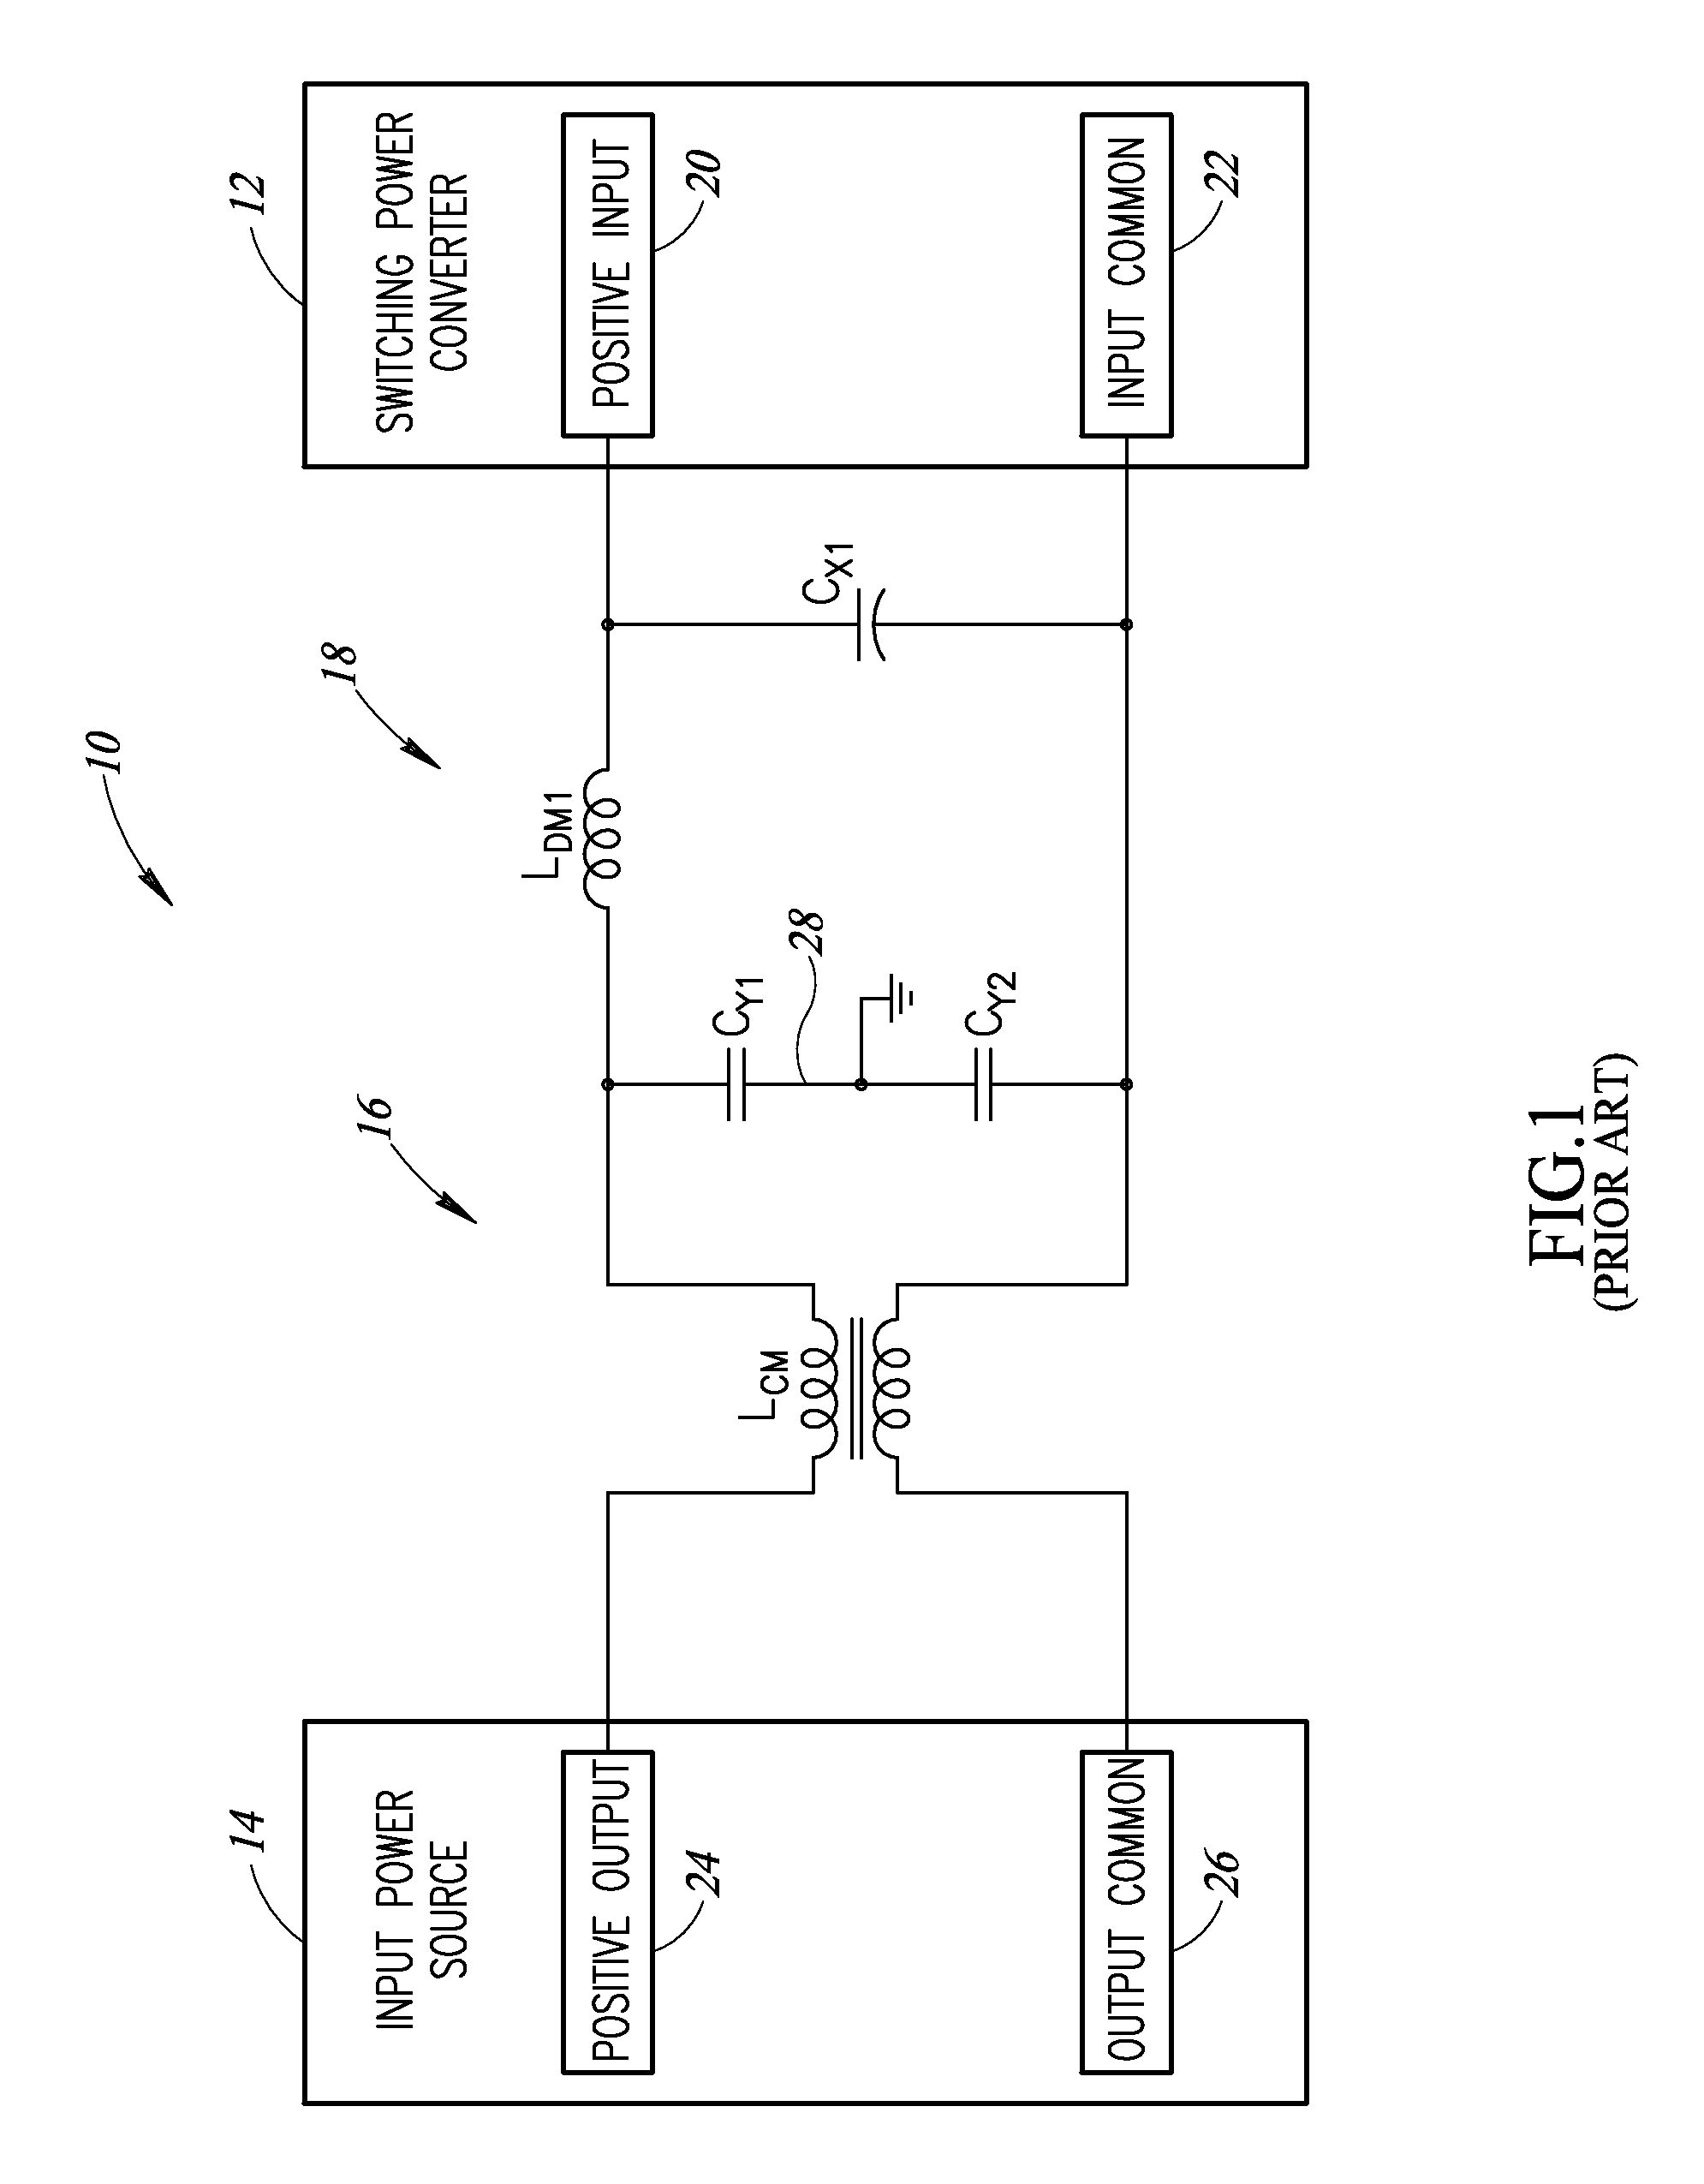 Integrated tri-state electromagnetic interference filter and line conditioning module